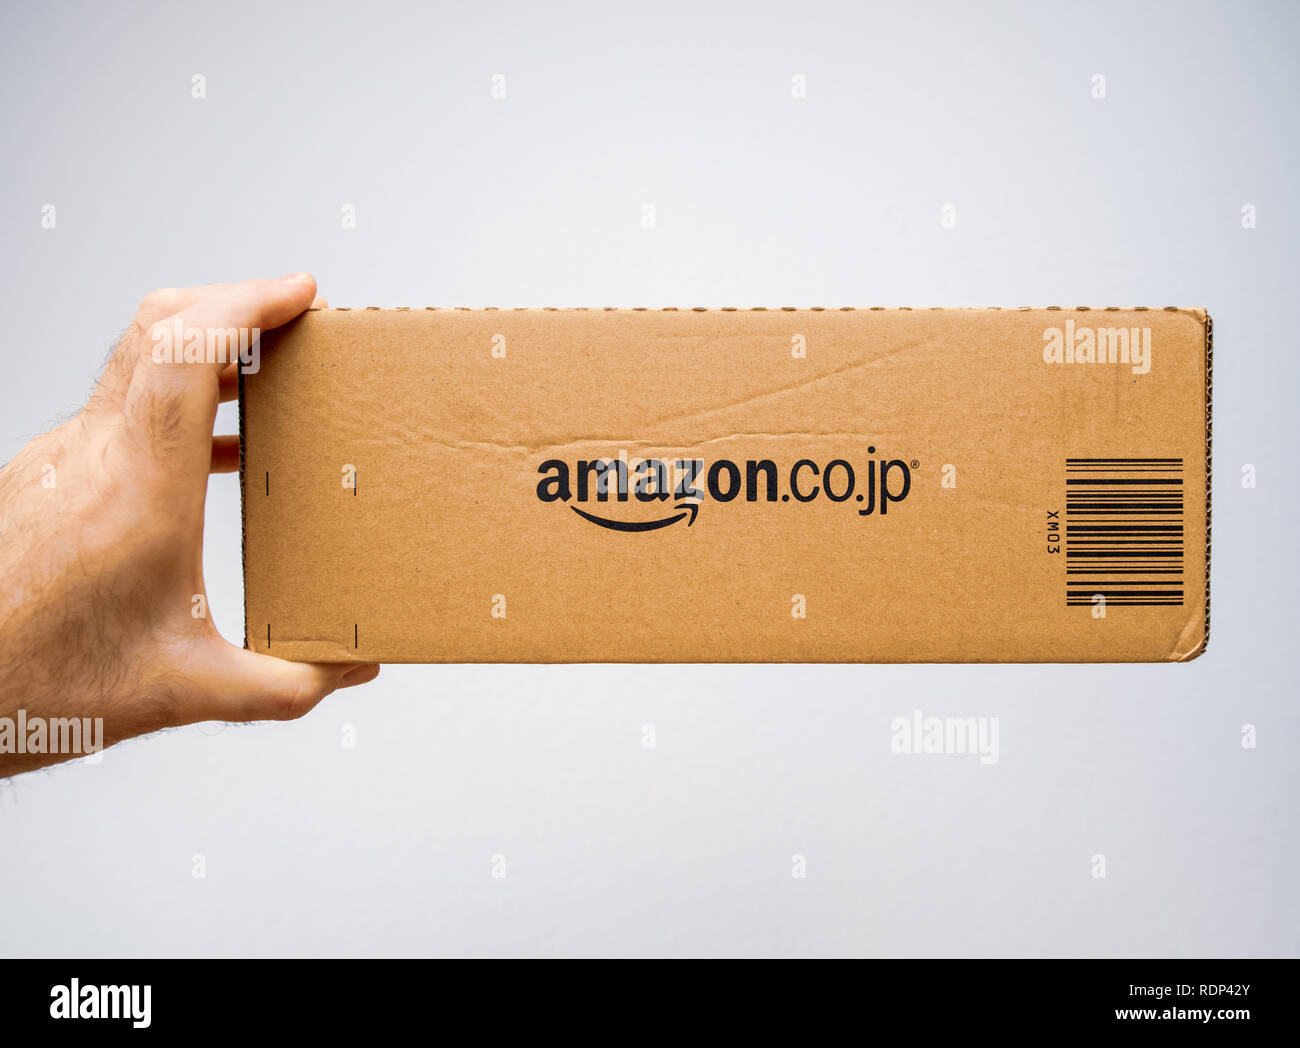 PARIS, FRANCE - FEB 5, 2018: Man holding the side view of Amazon Japan  prime cardboard delivery box parcel against white background - on-line  e-commerce shopping Stock Photo - Alamy